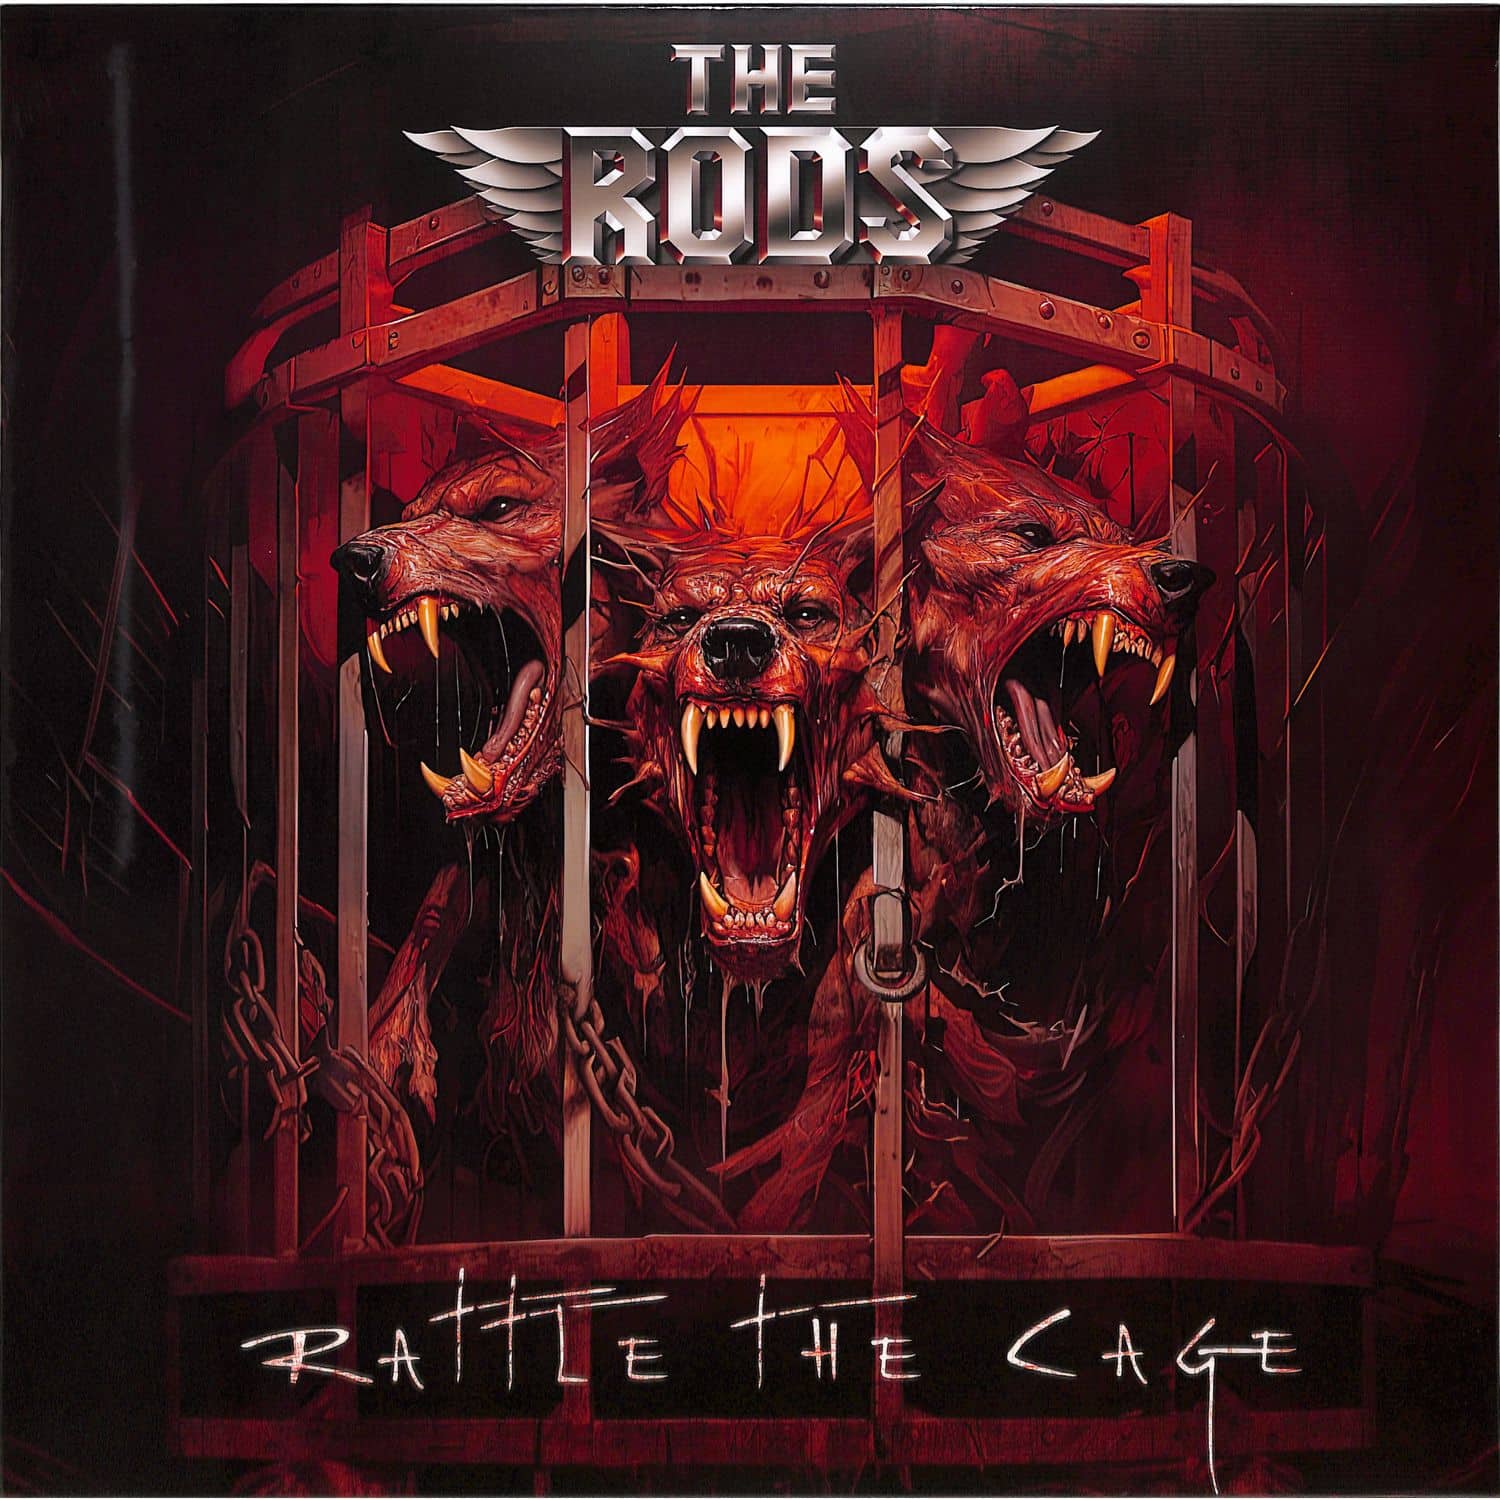 The Rods - RATTLE THE CAGE 